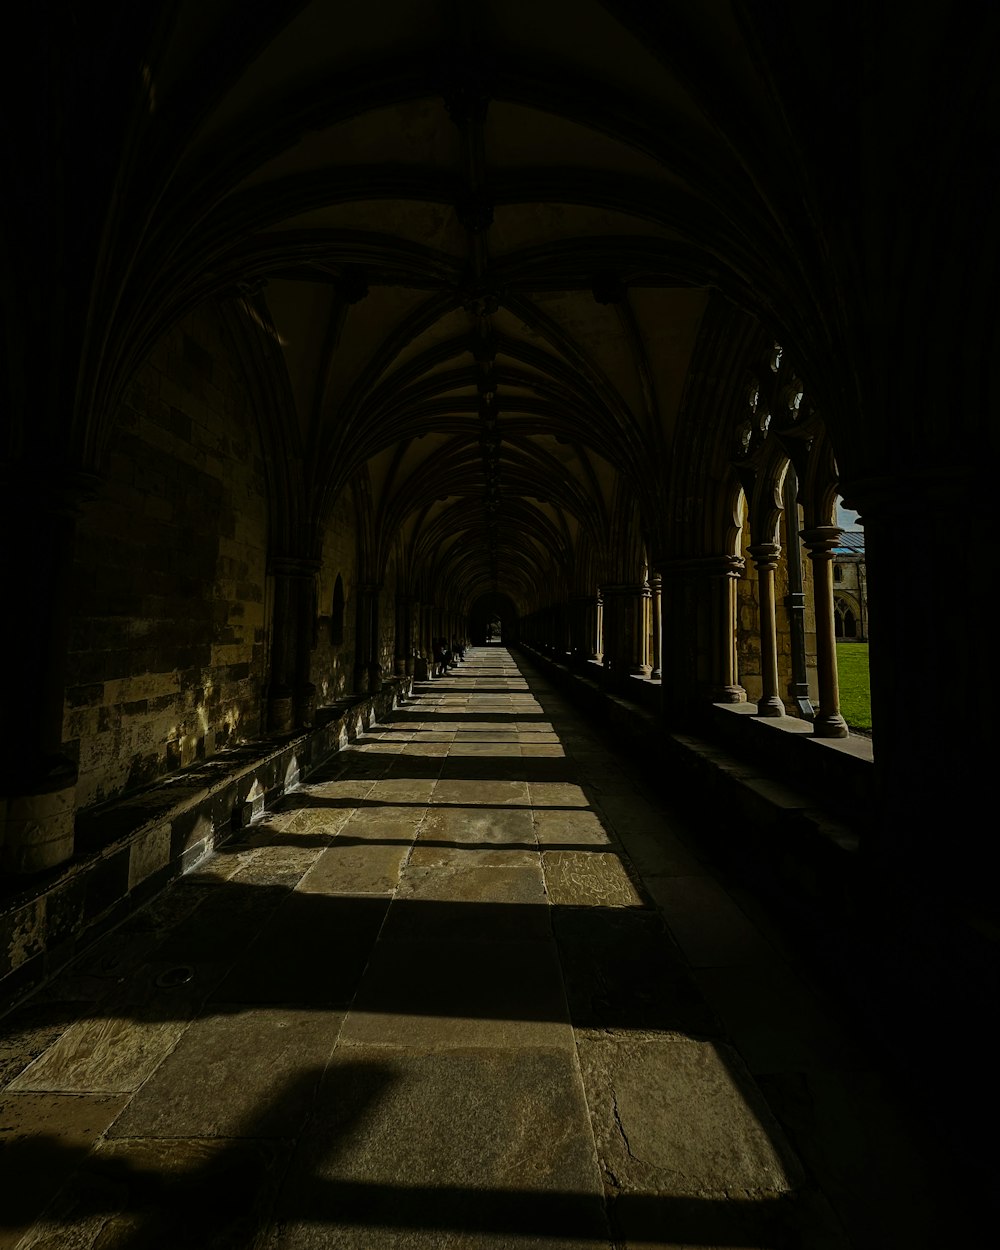 a long hallway with arches and stone flooring